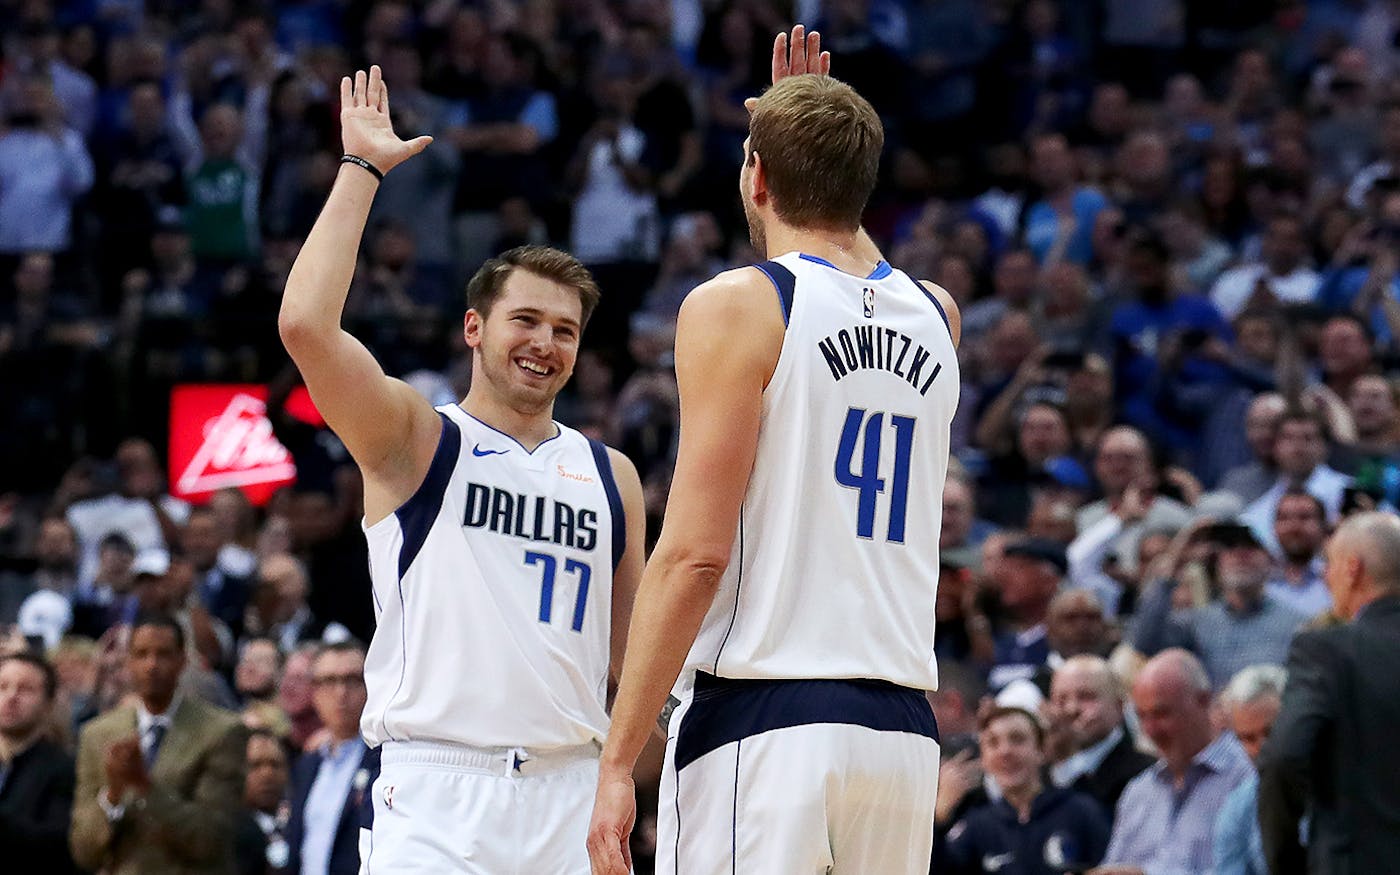 NBA on ESPN on X: Luka Doncic is now tied with Dirk Nowitzki for